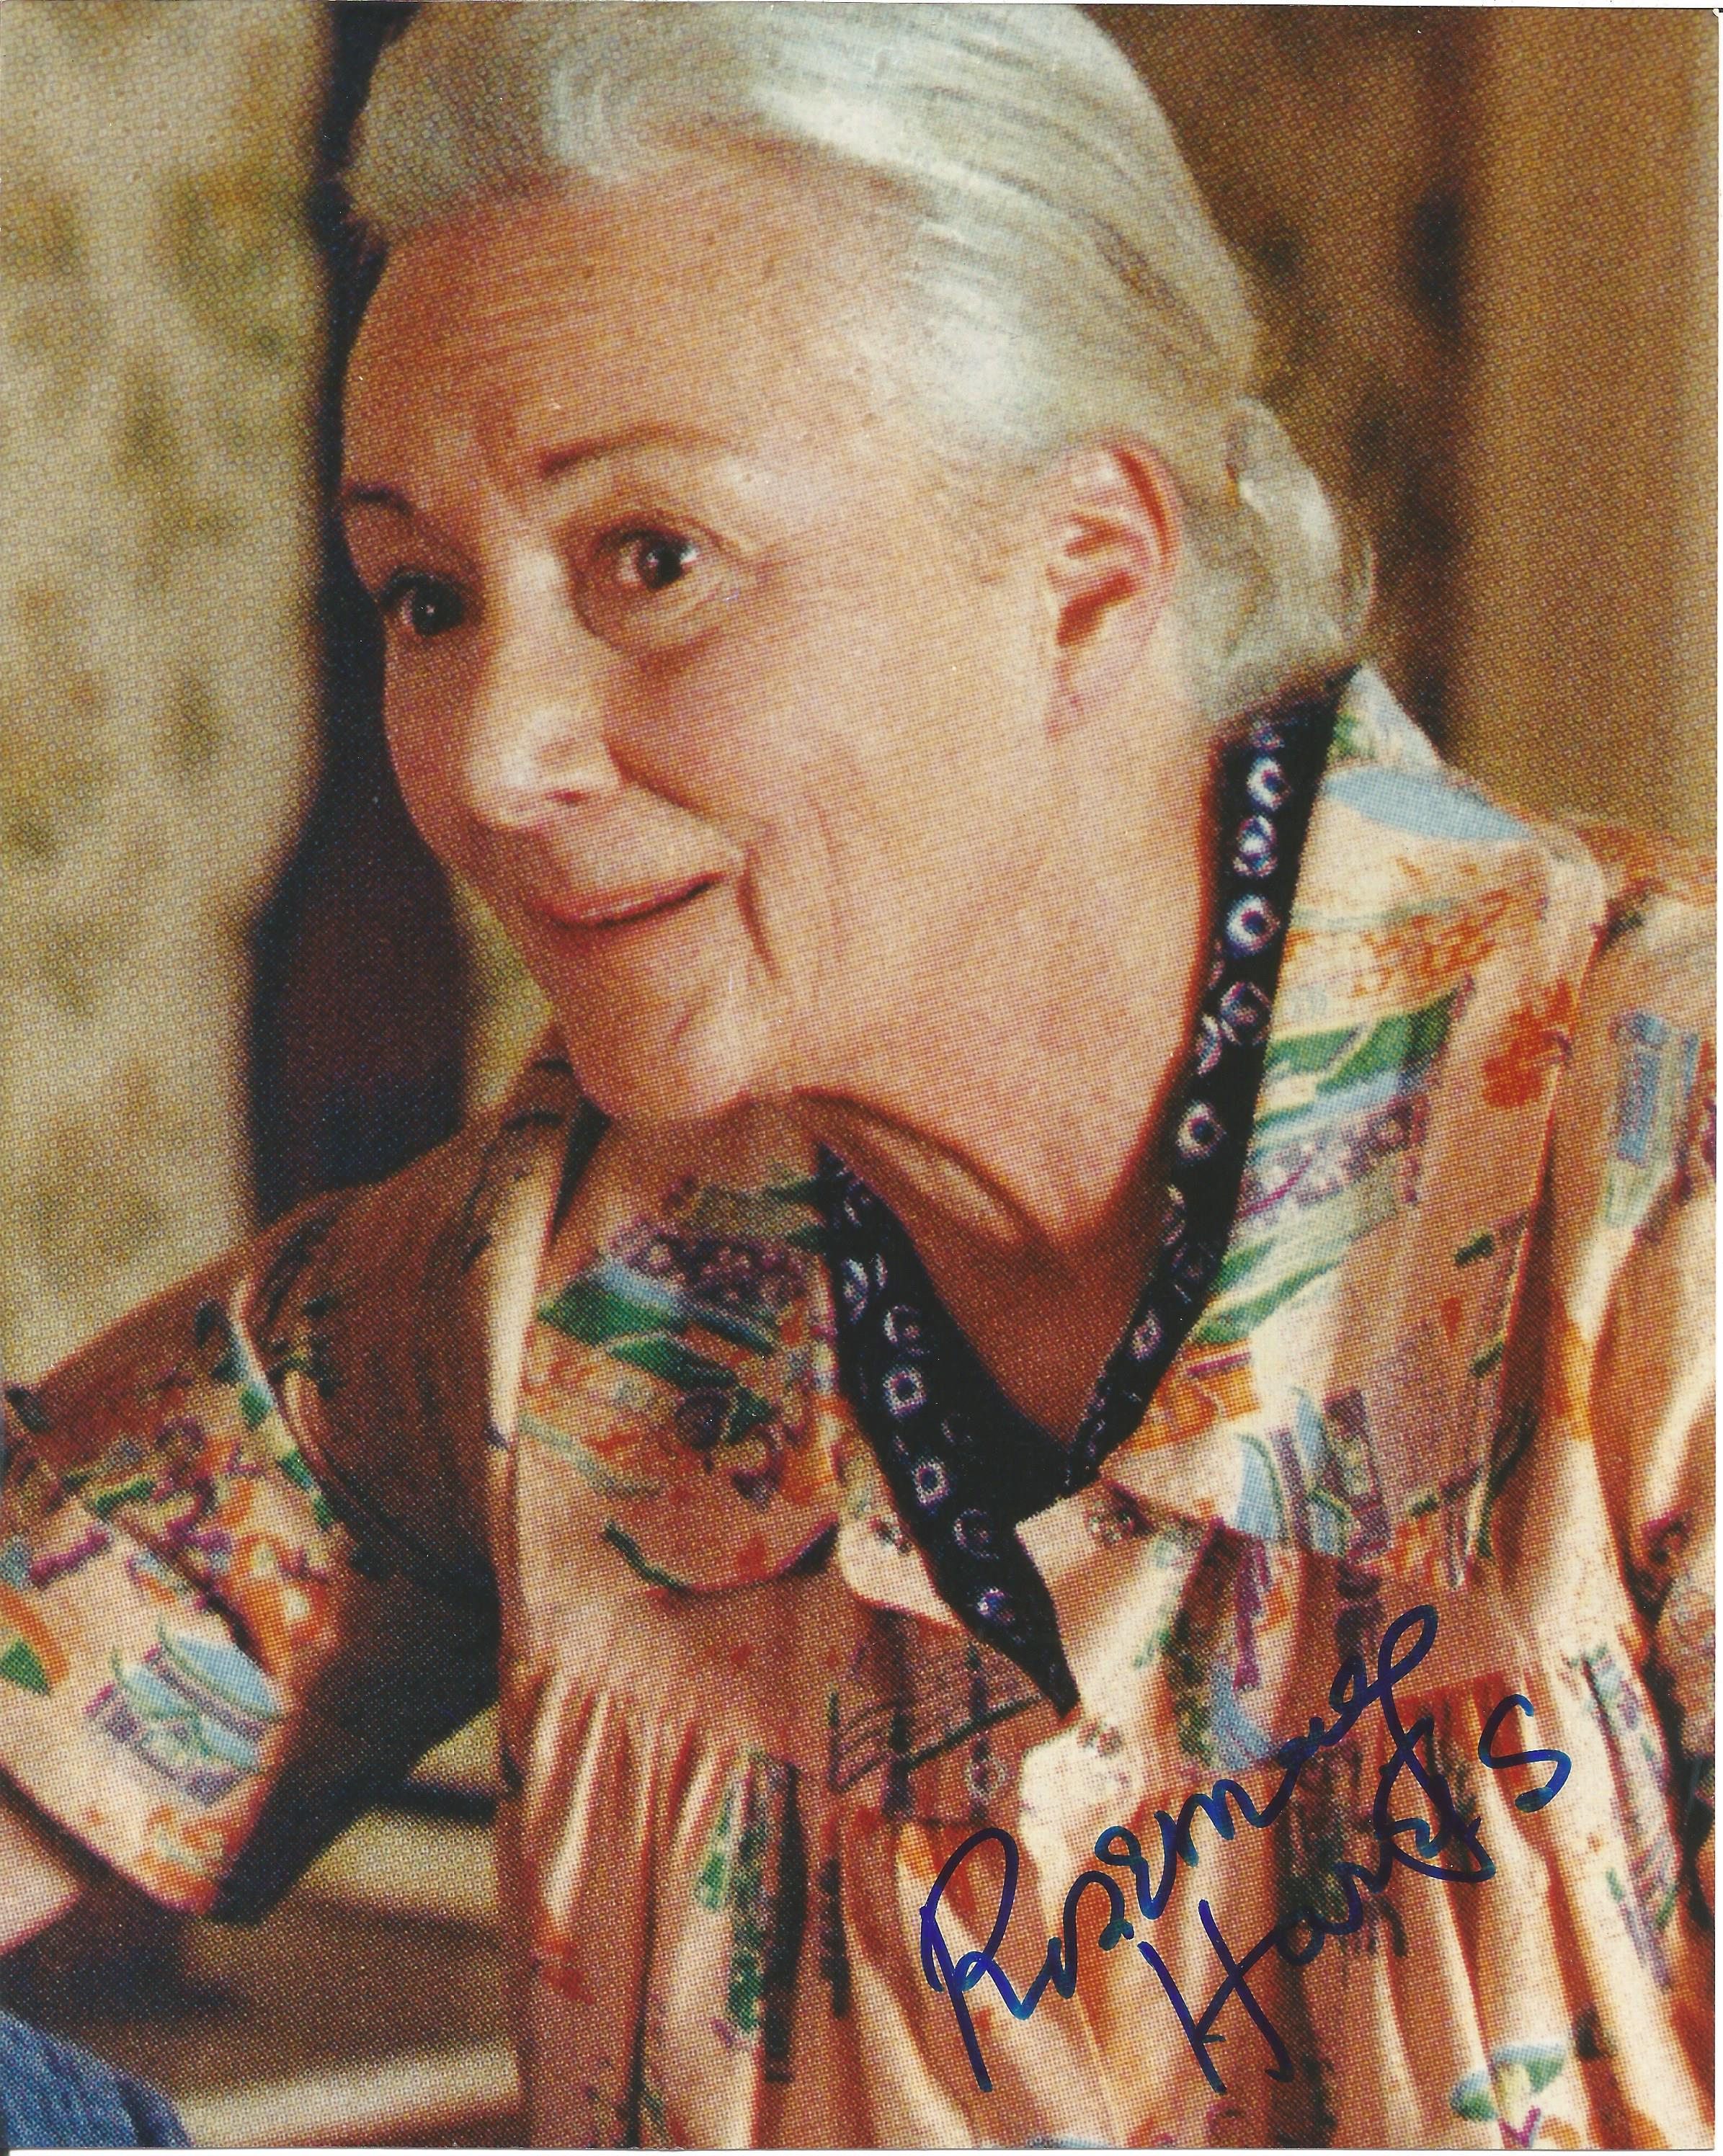 Rosemary Harris signed 10x8 colour photo. Good condition. All autographs come with a Certificate